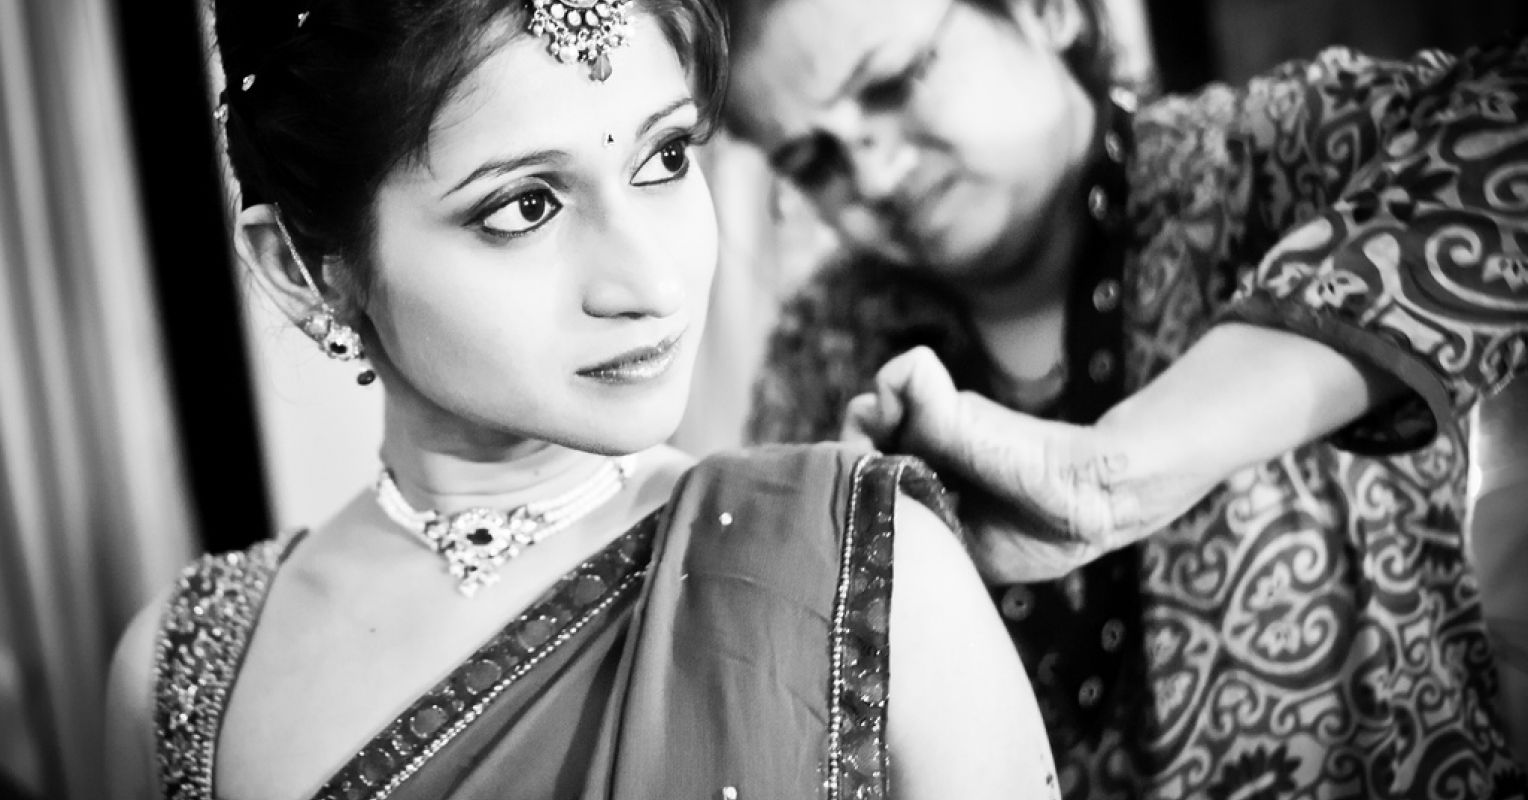 Why Are So Many Indian Arranged Marriages Successful? Psychology Today